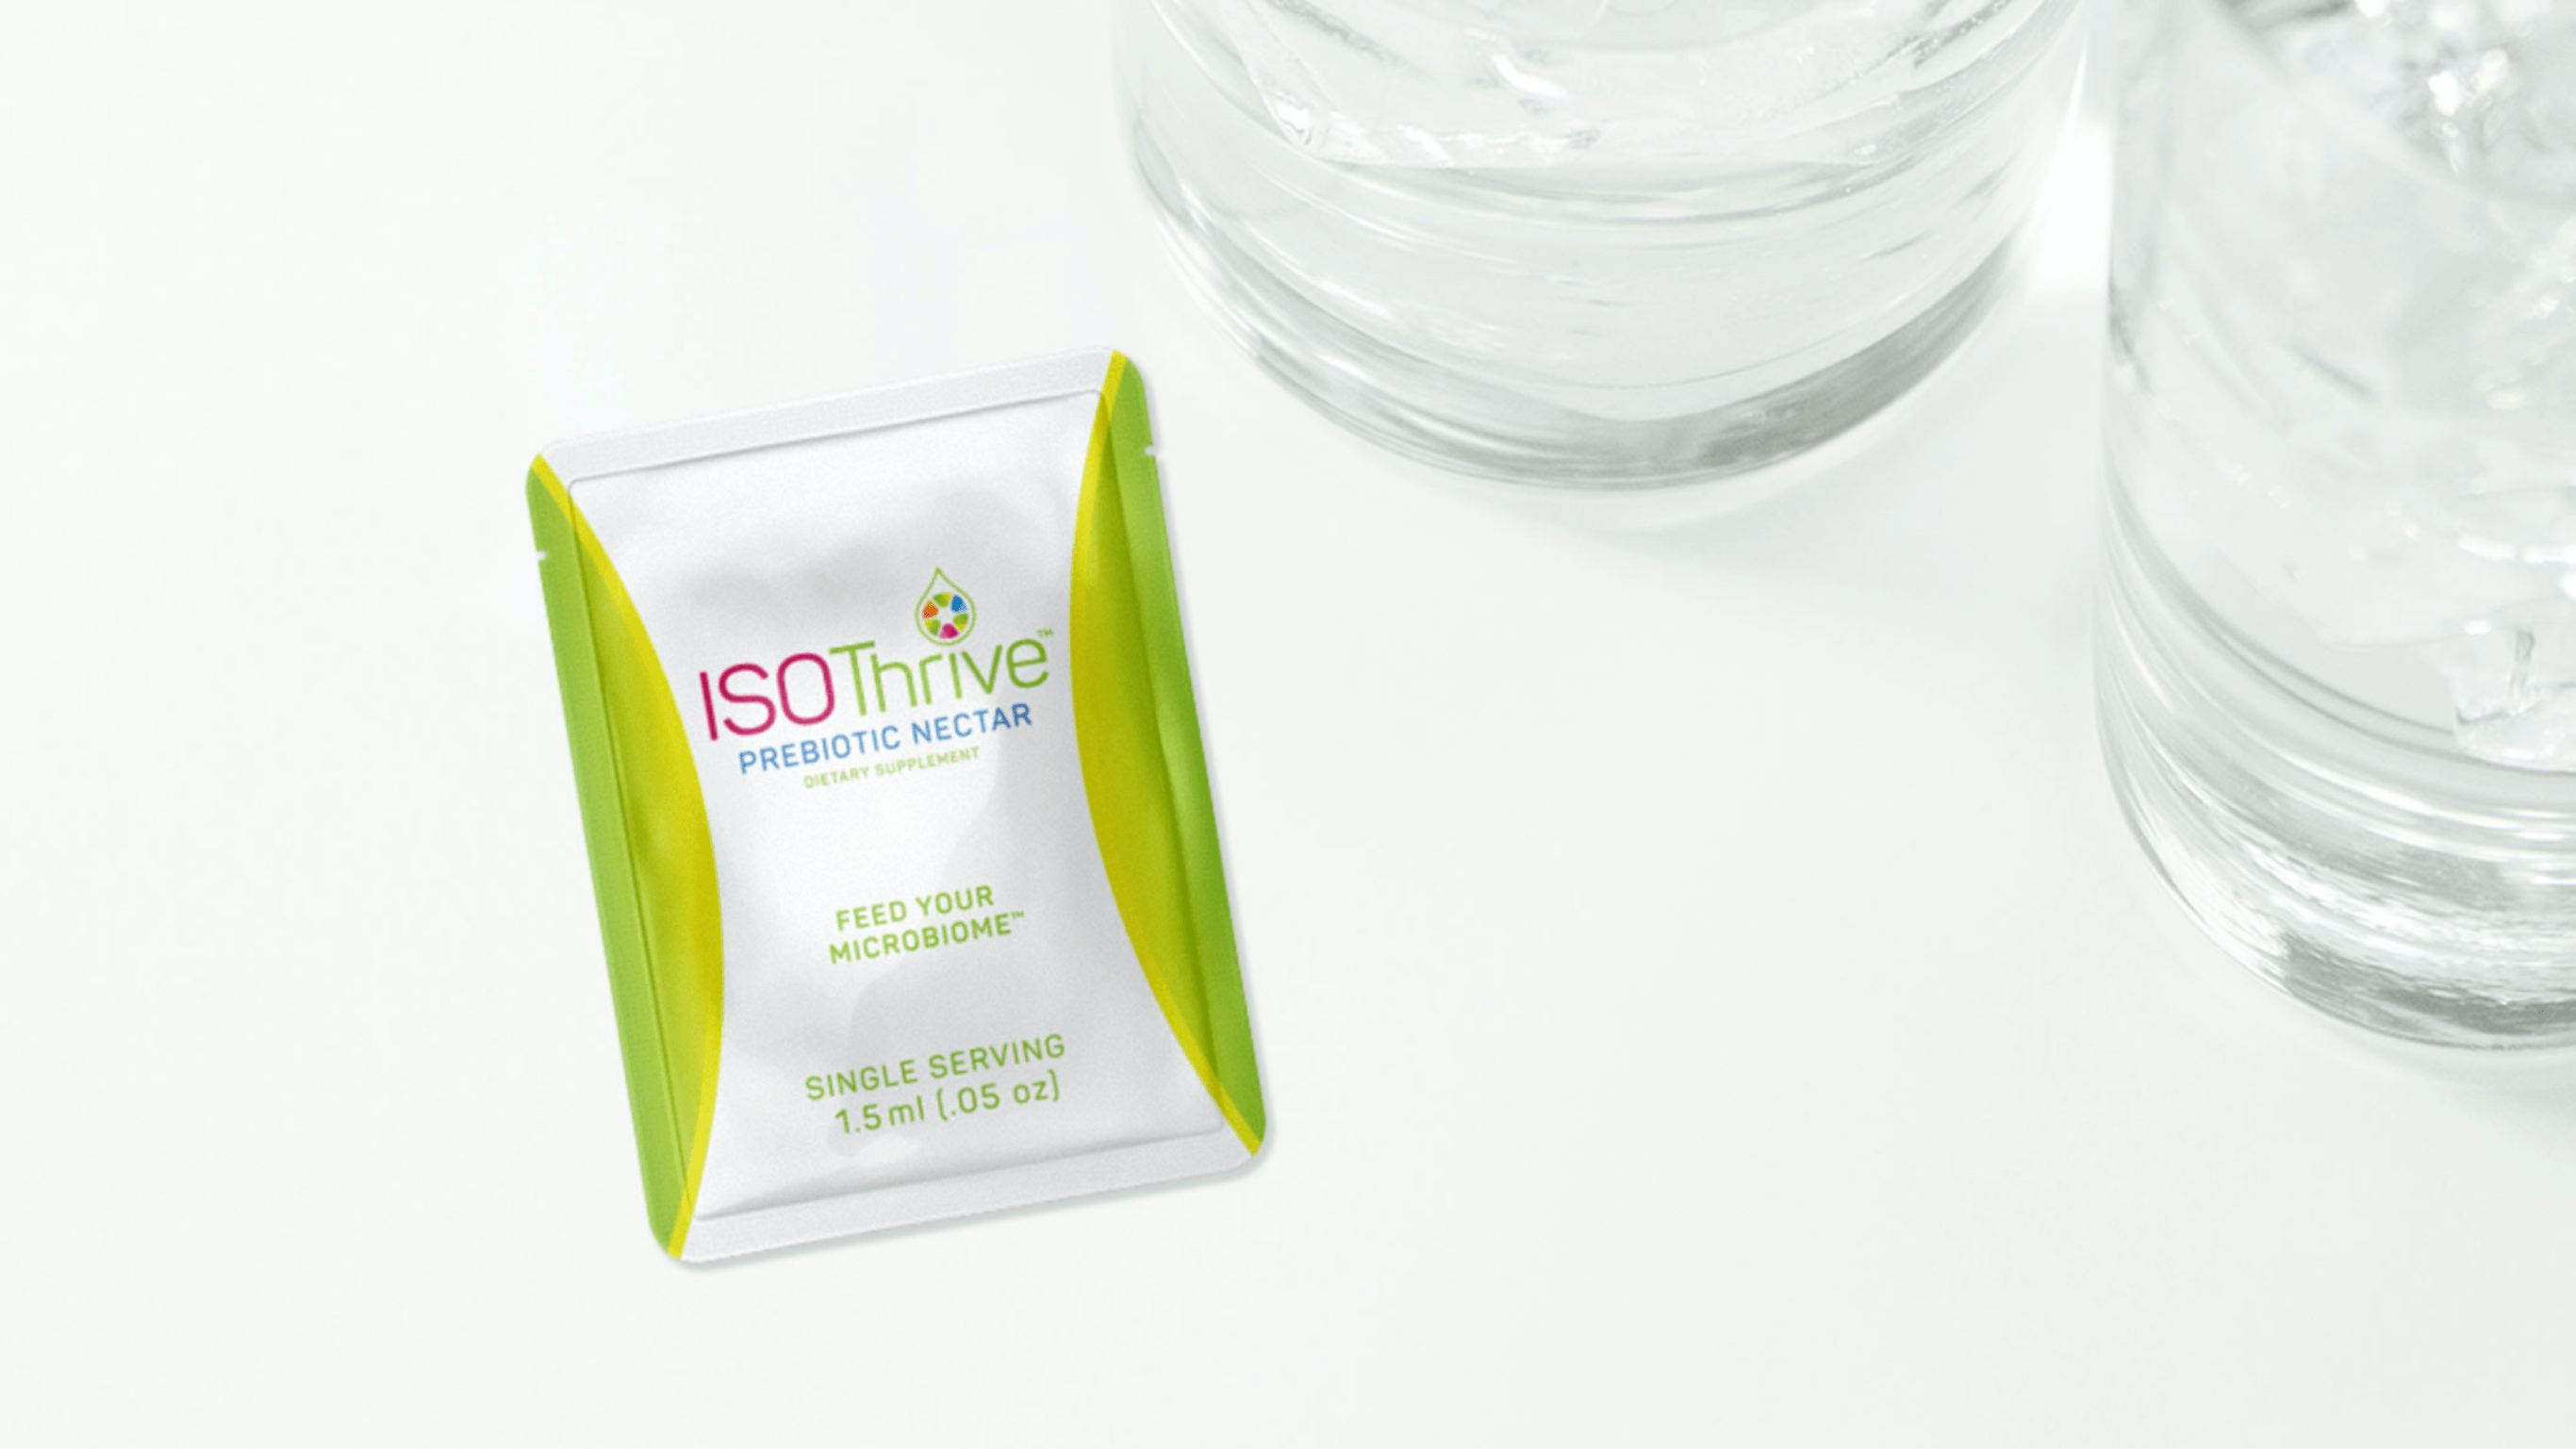 Iso Thrive packet with water glass